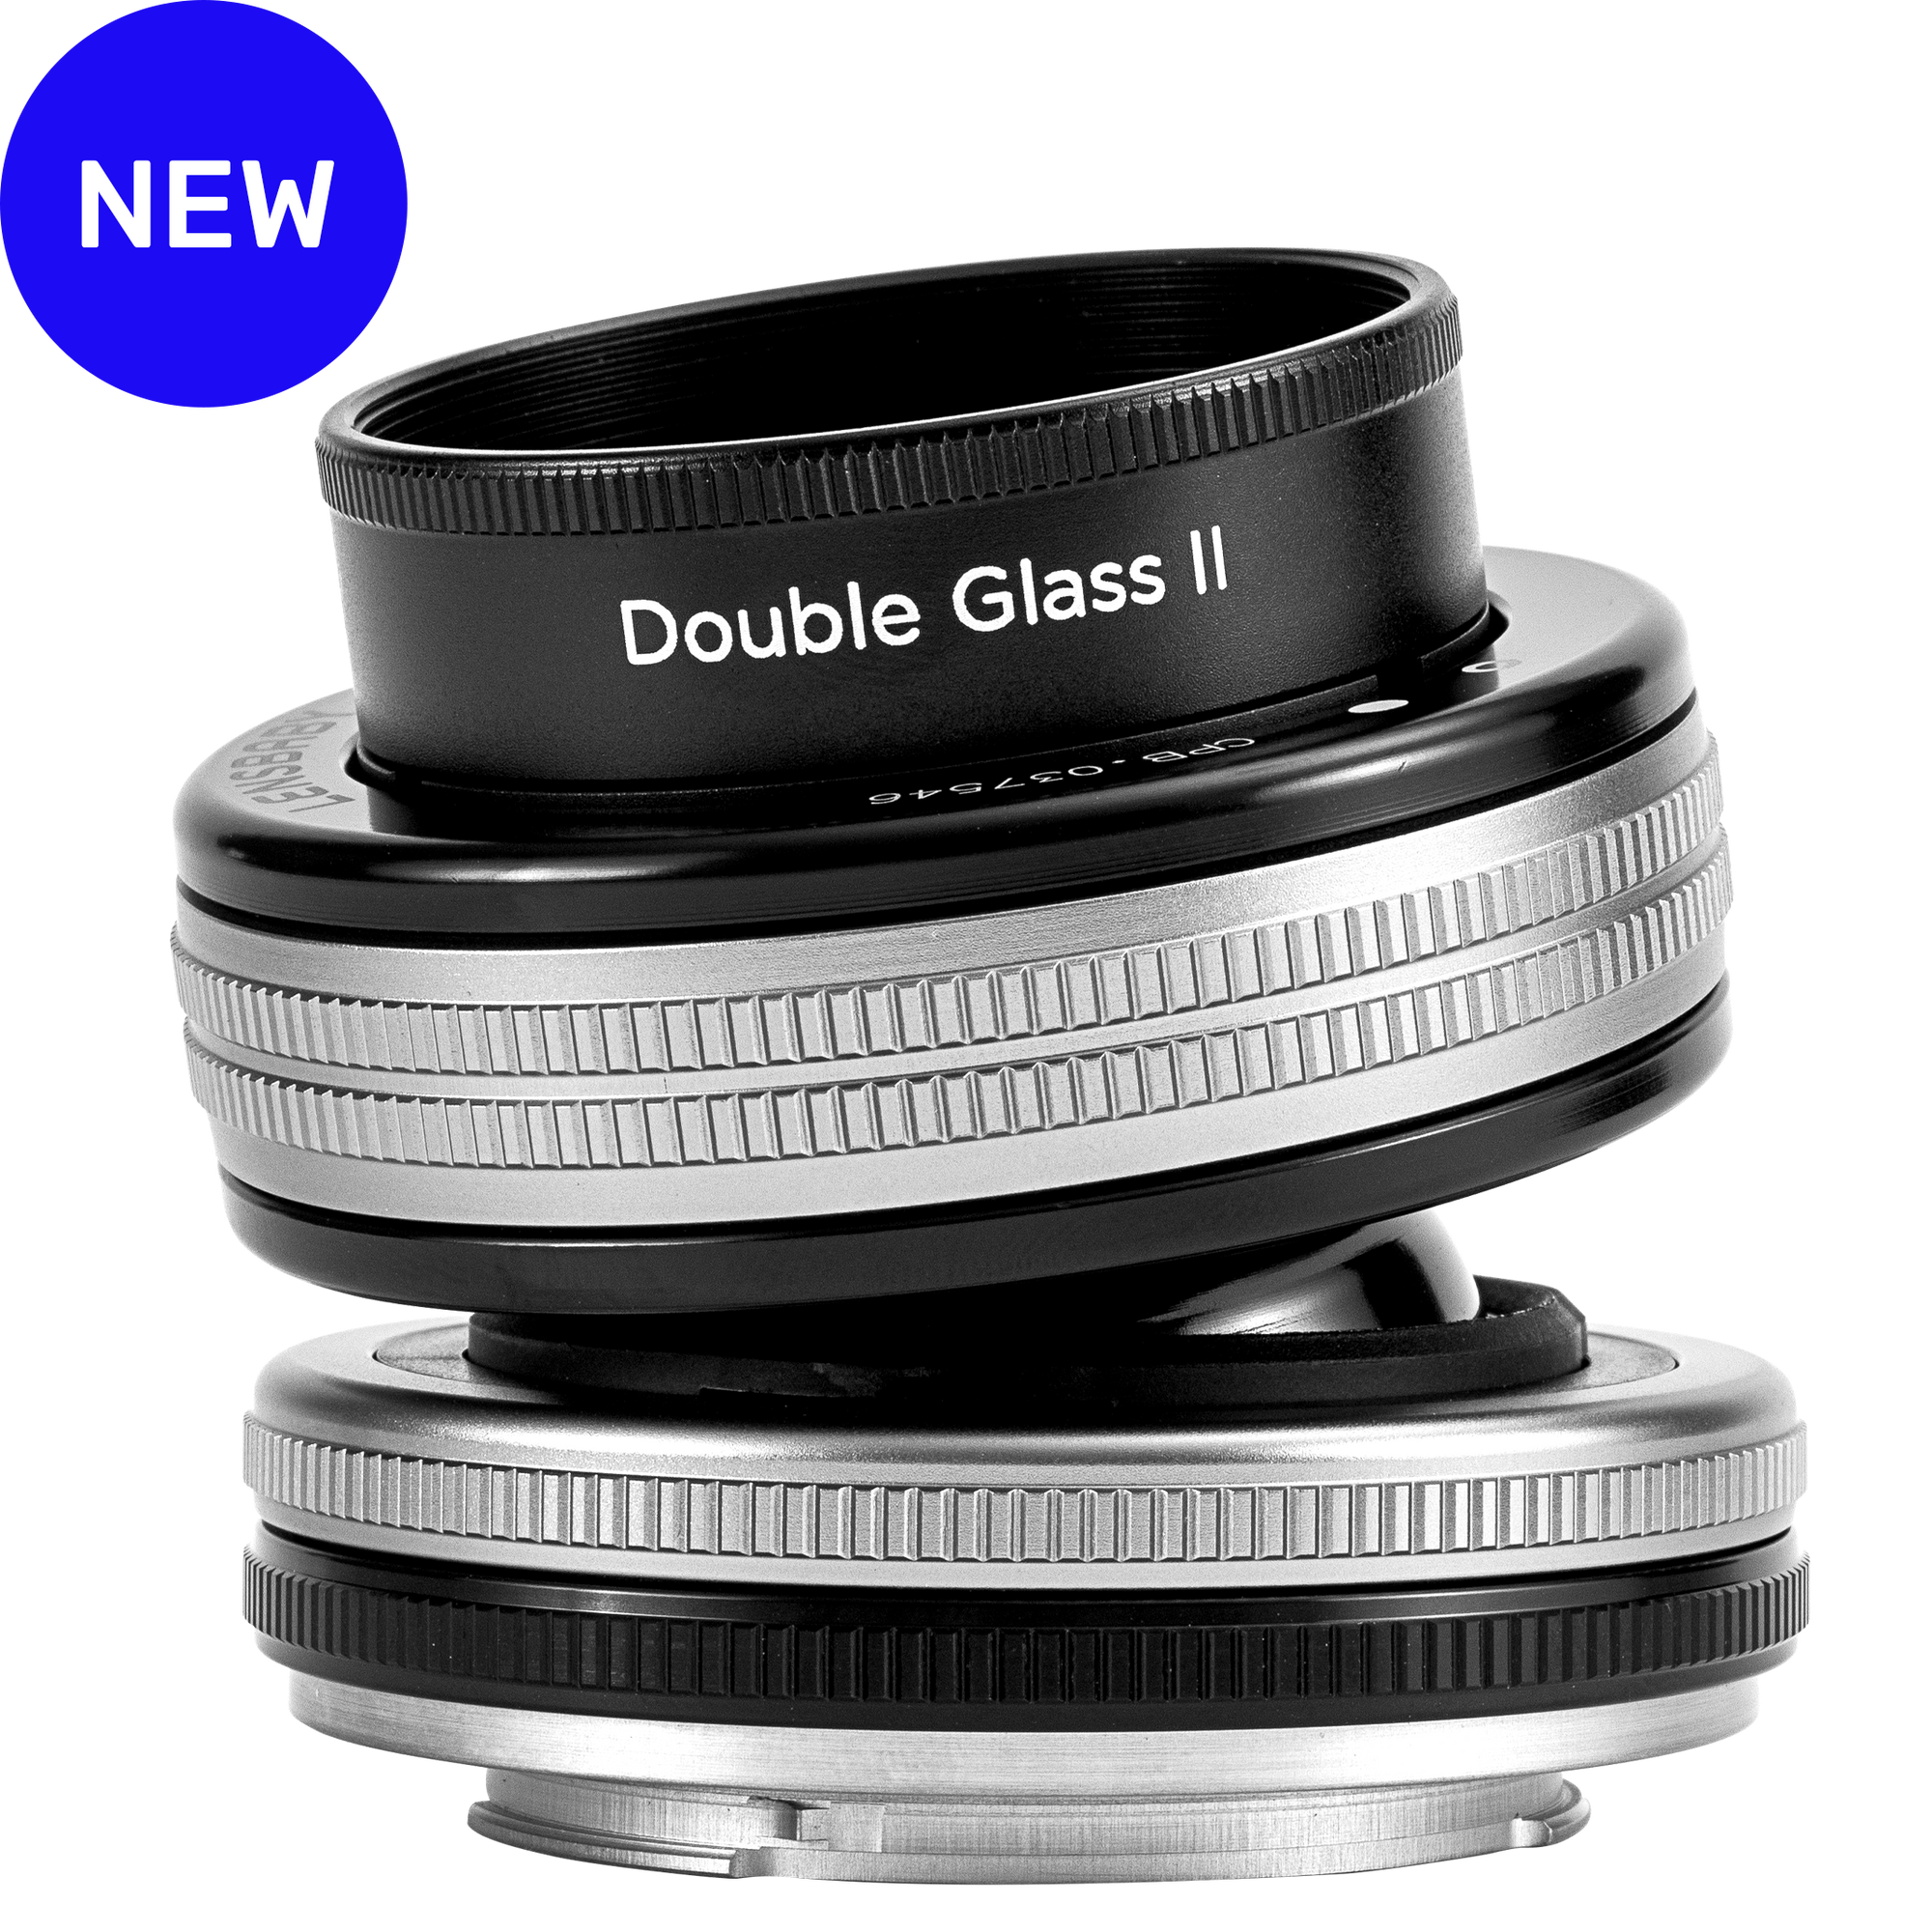 Composer Pro II + Double Glass II - Lensbaby Creative Effect Camera Lenses